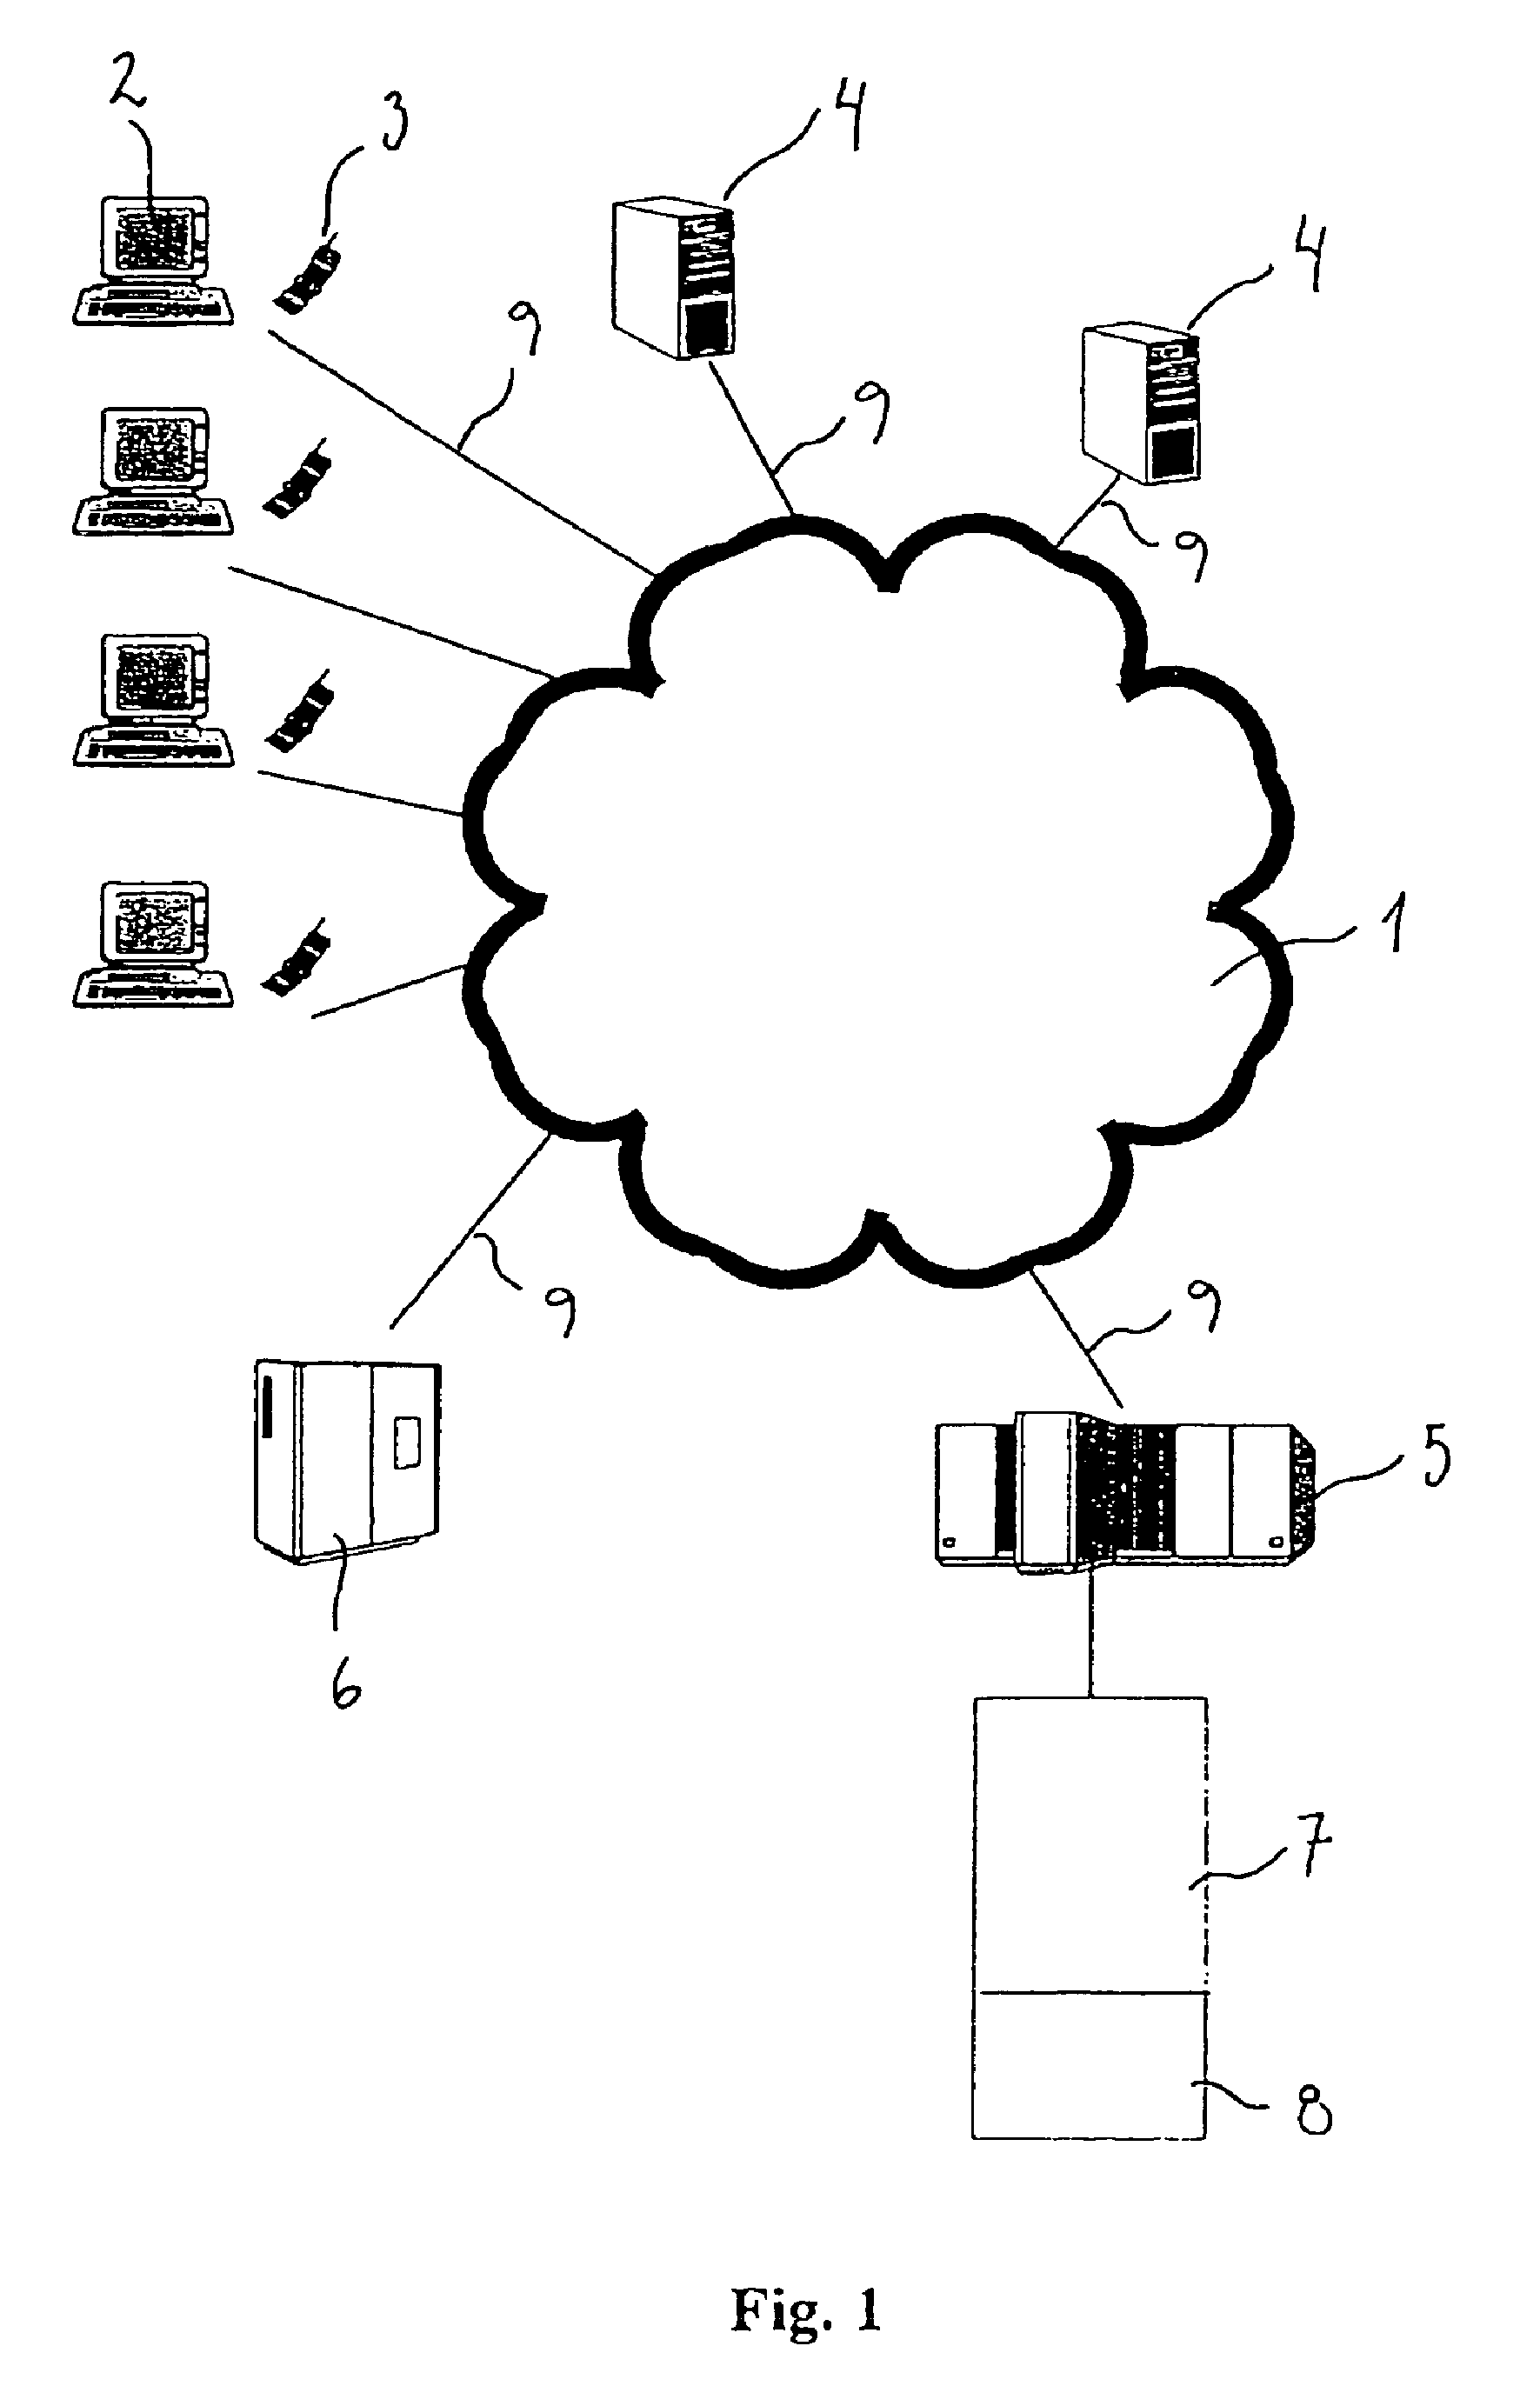 Method for performing a transaction over a network